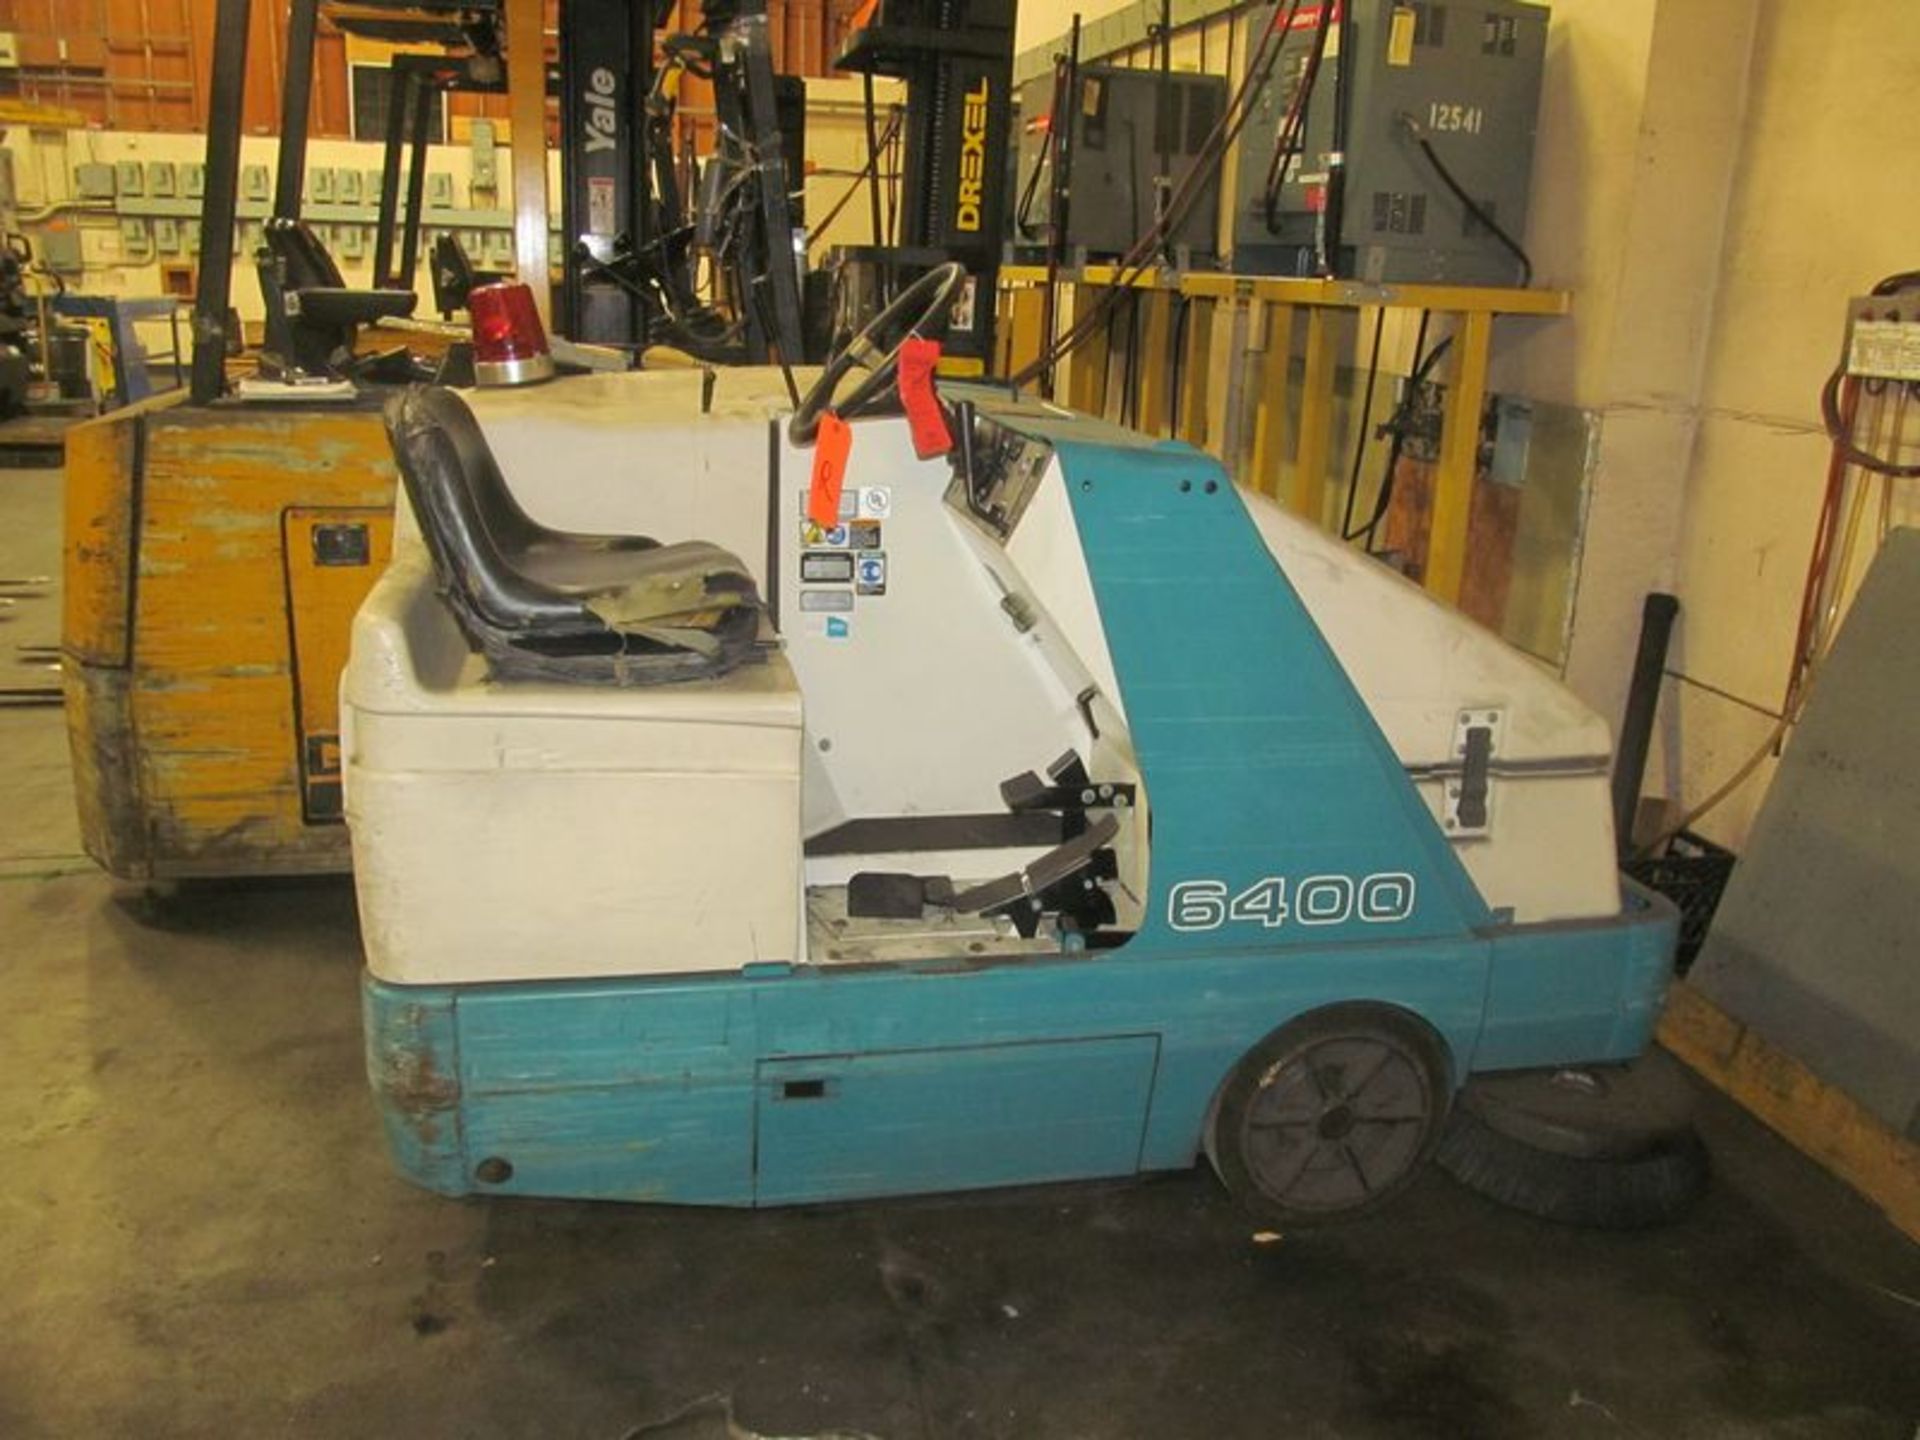 Tennant propane powered floor scrubber/sweeper, 1968 hrs. IN NEED OF REPAIR